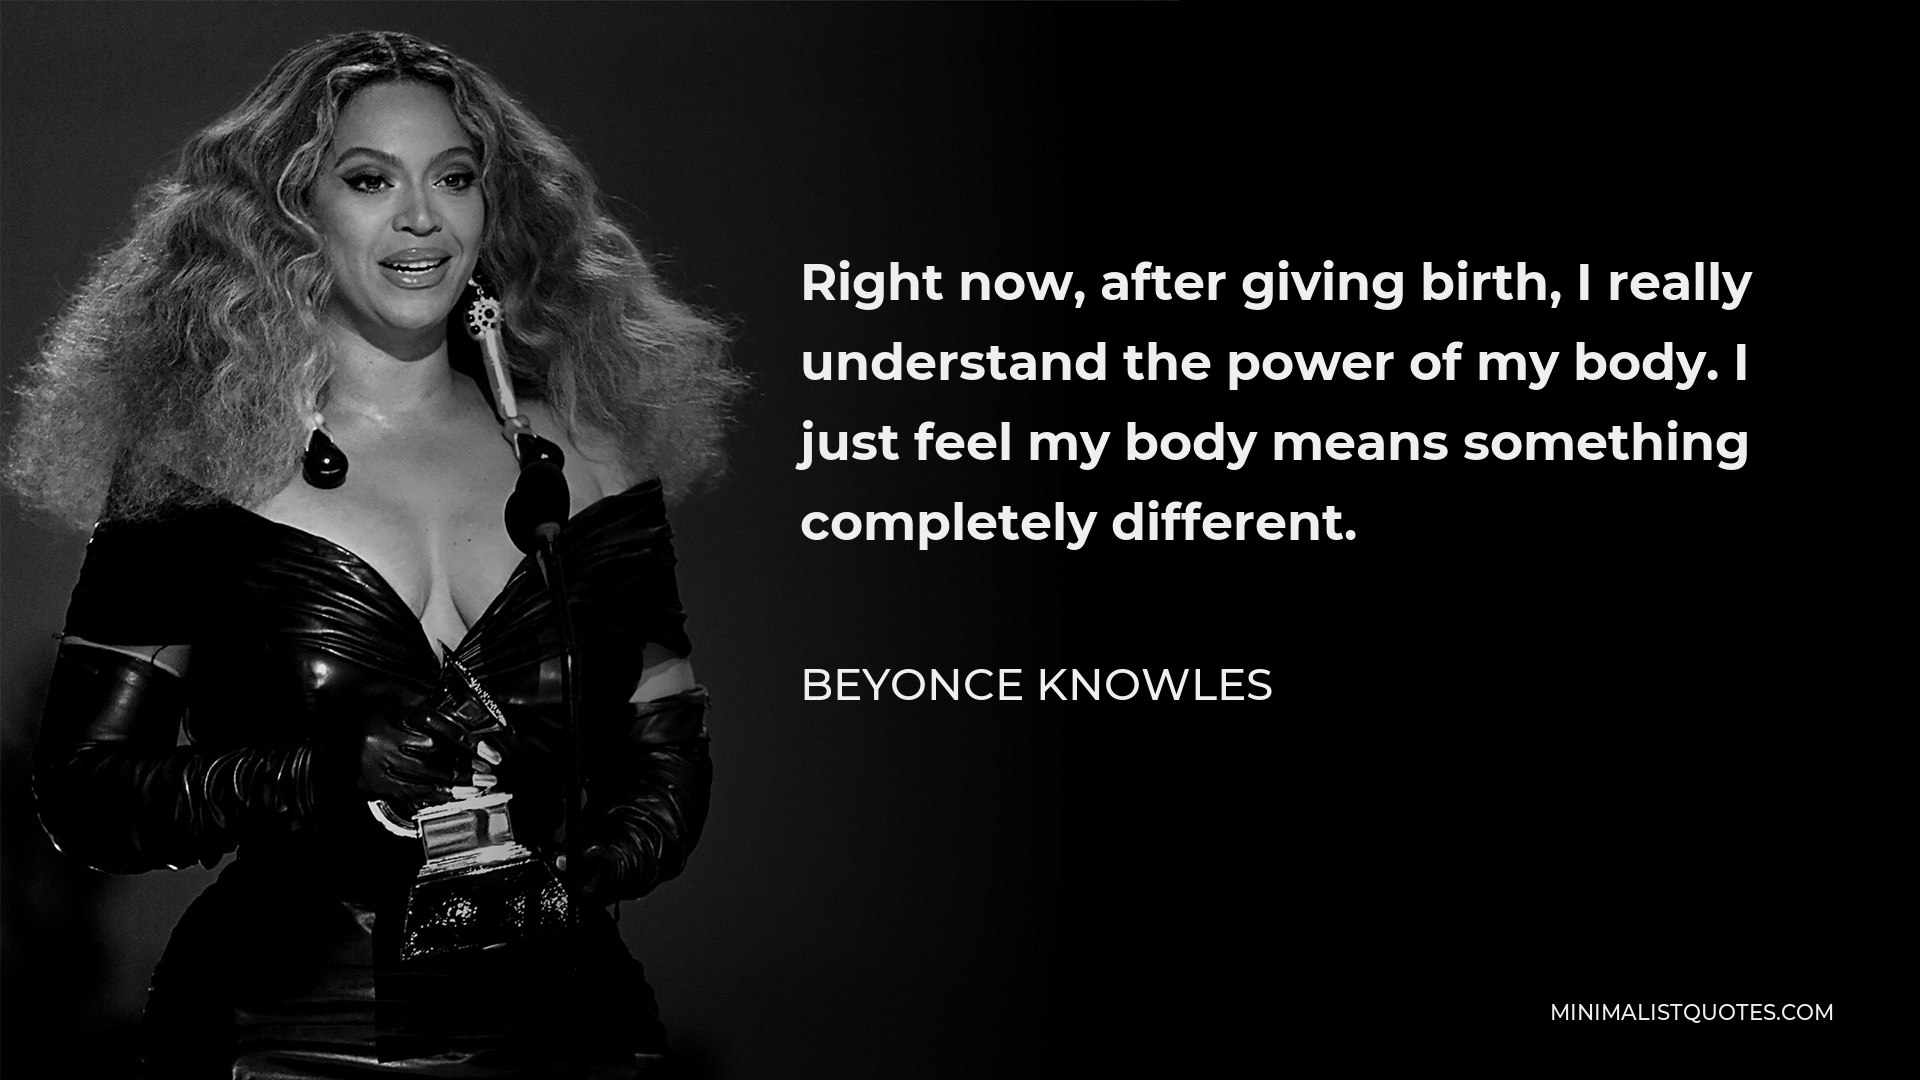 Beyonce Knowles Quote - Right now, after giving birth, I really understand the power of my body. I just feel my body means something completely different.